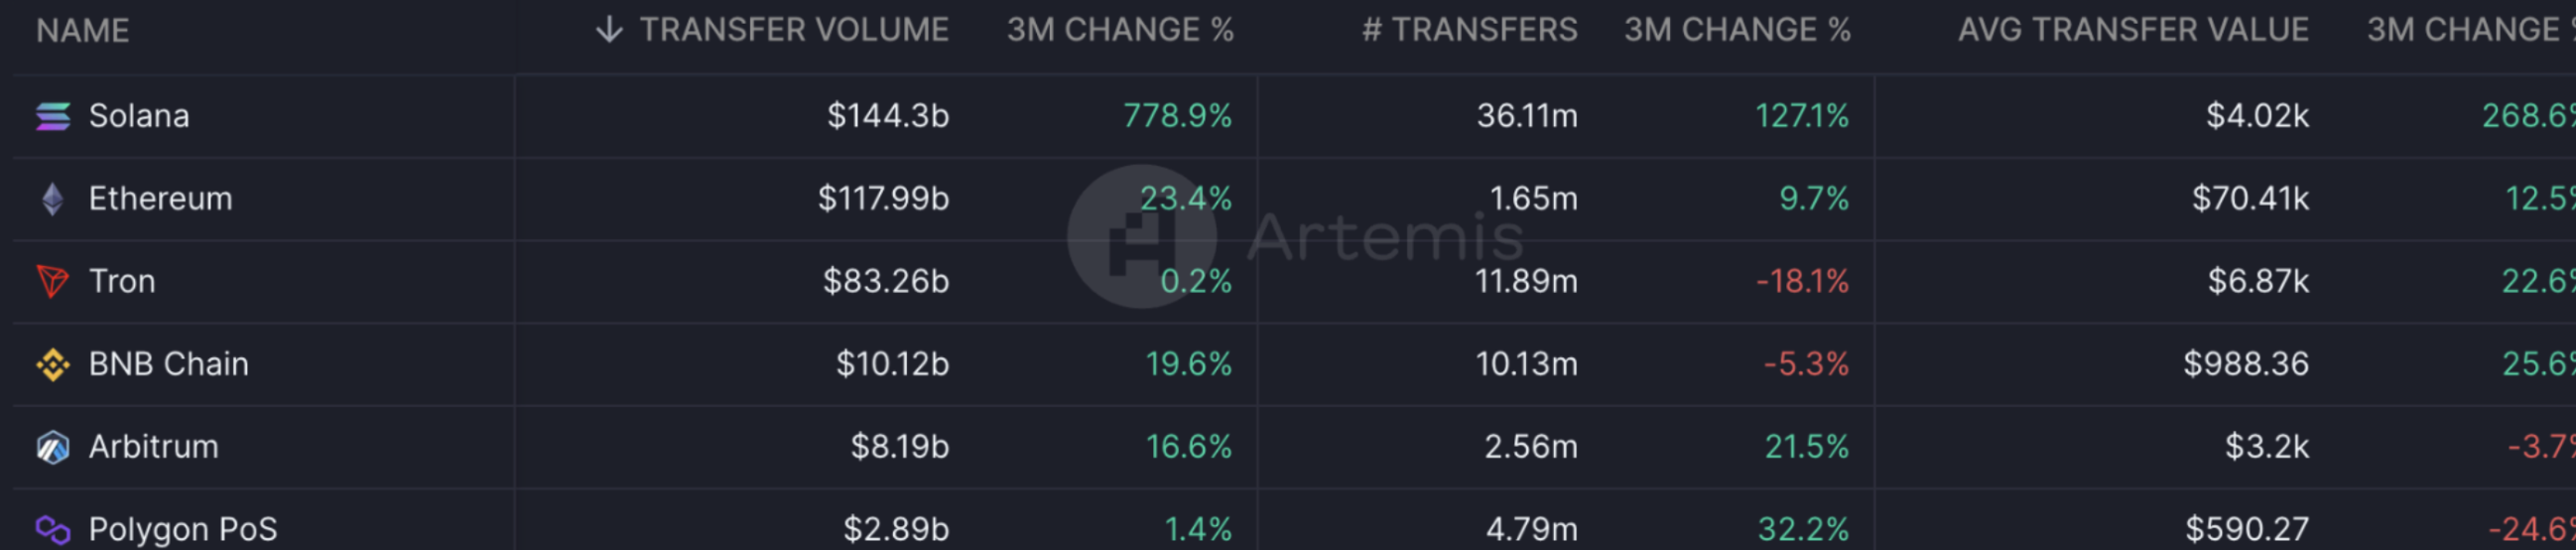 Data Source: Artemis (Do not mind Solana as their volume is coming from only 9 wallets - market makers)